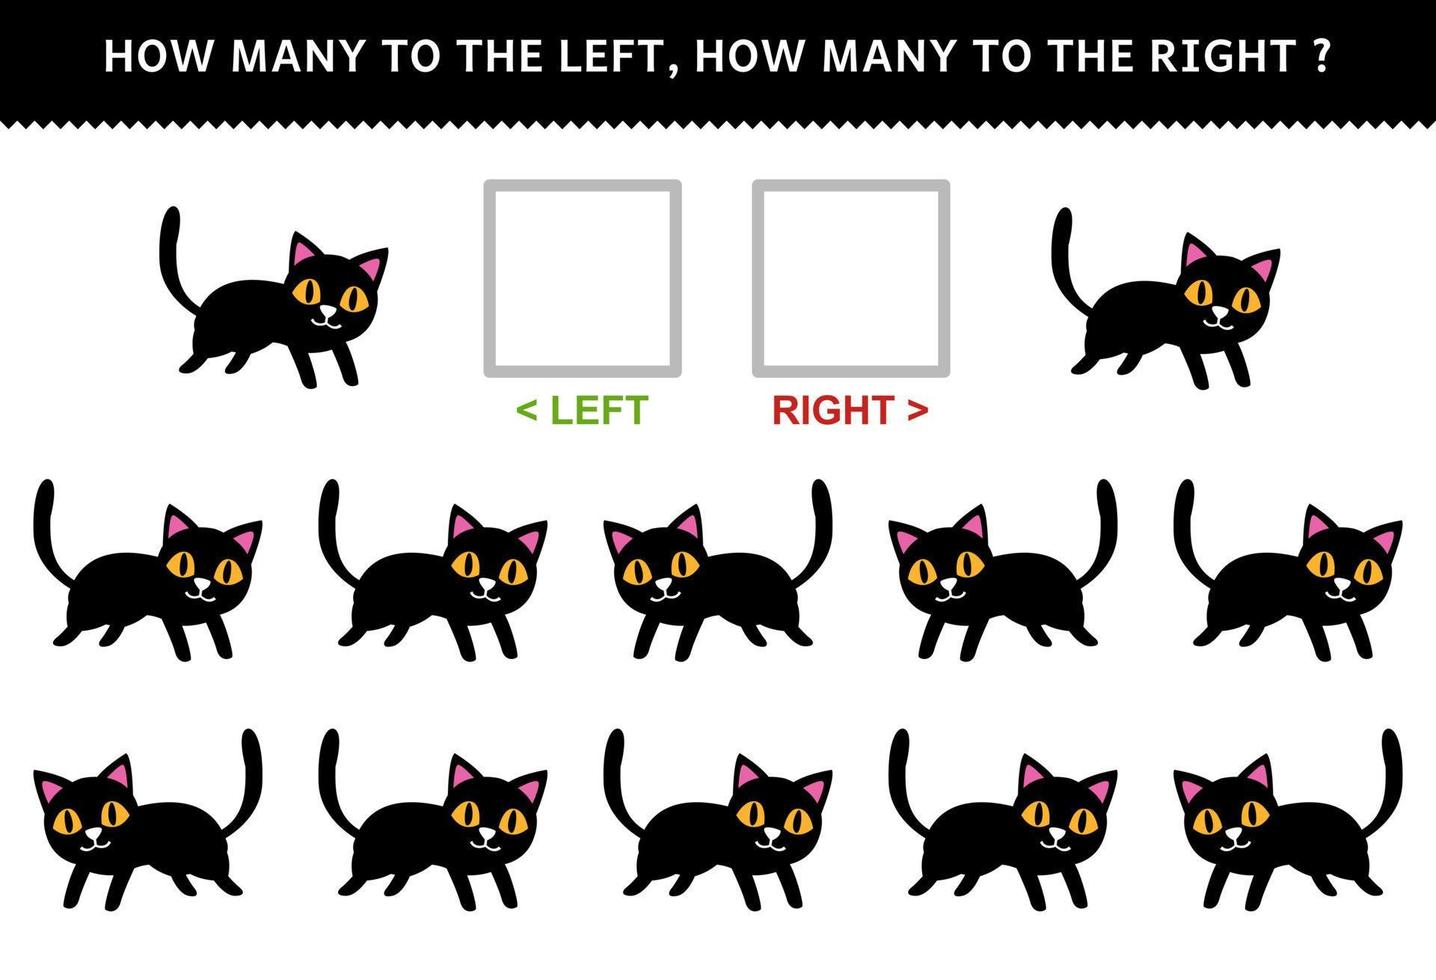 Education game for children of counting left and right picture of cute cartoon black cat halloween printable worksheet vector